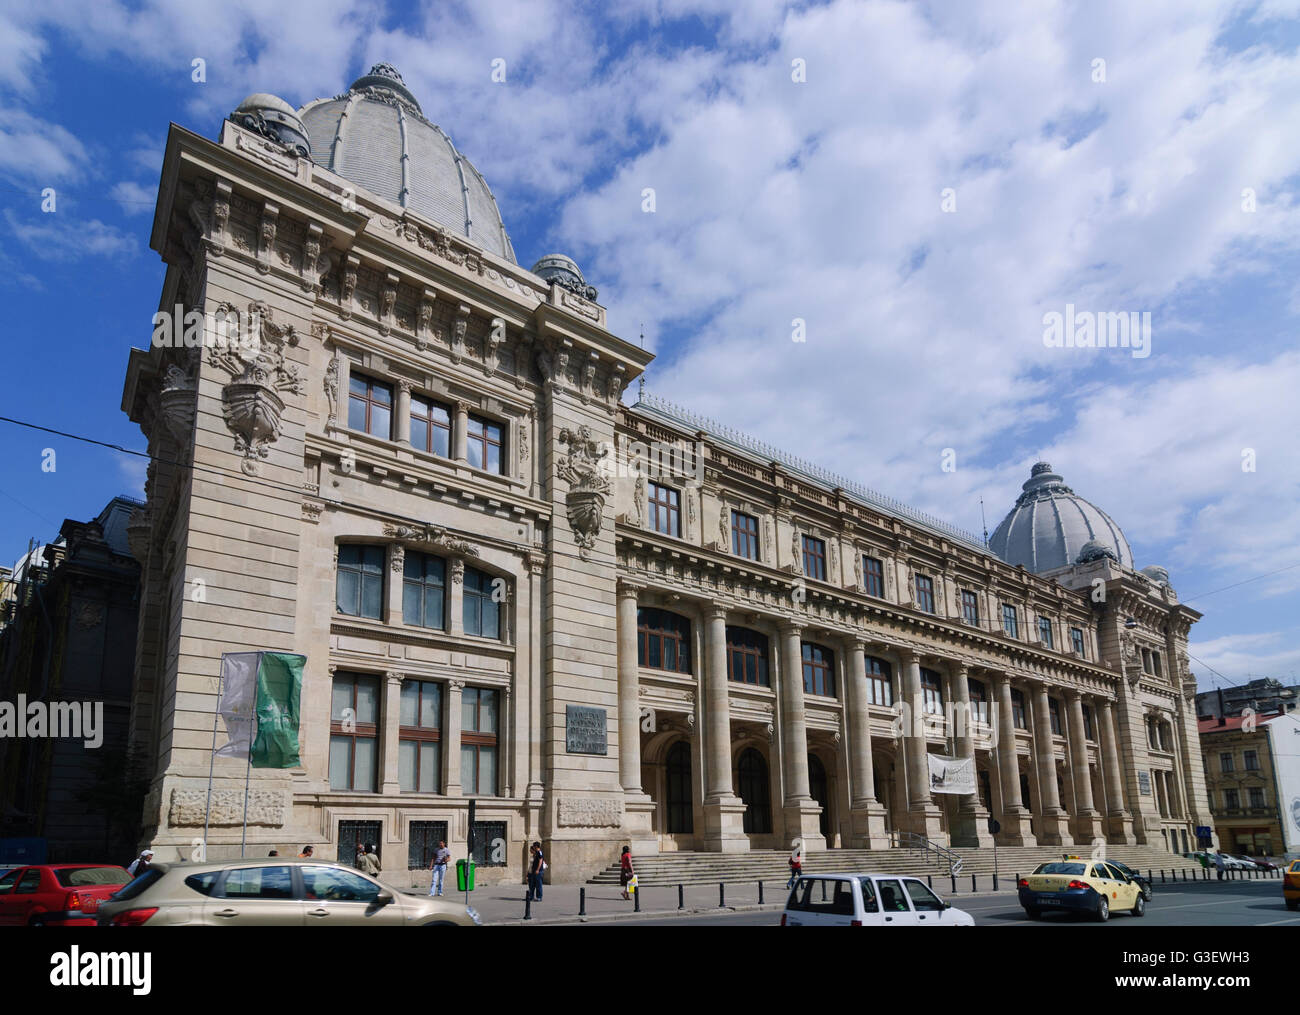 Museum of the country's history in Romania former Postpalast, Romania Bucharest Bucuresti Stock Photo